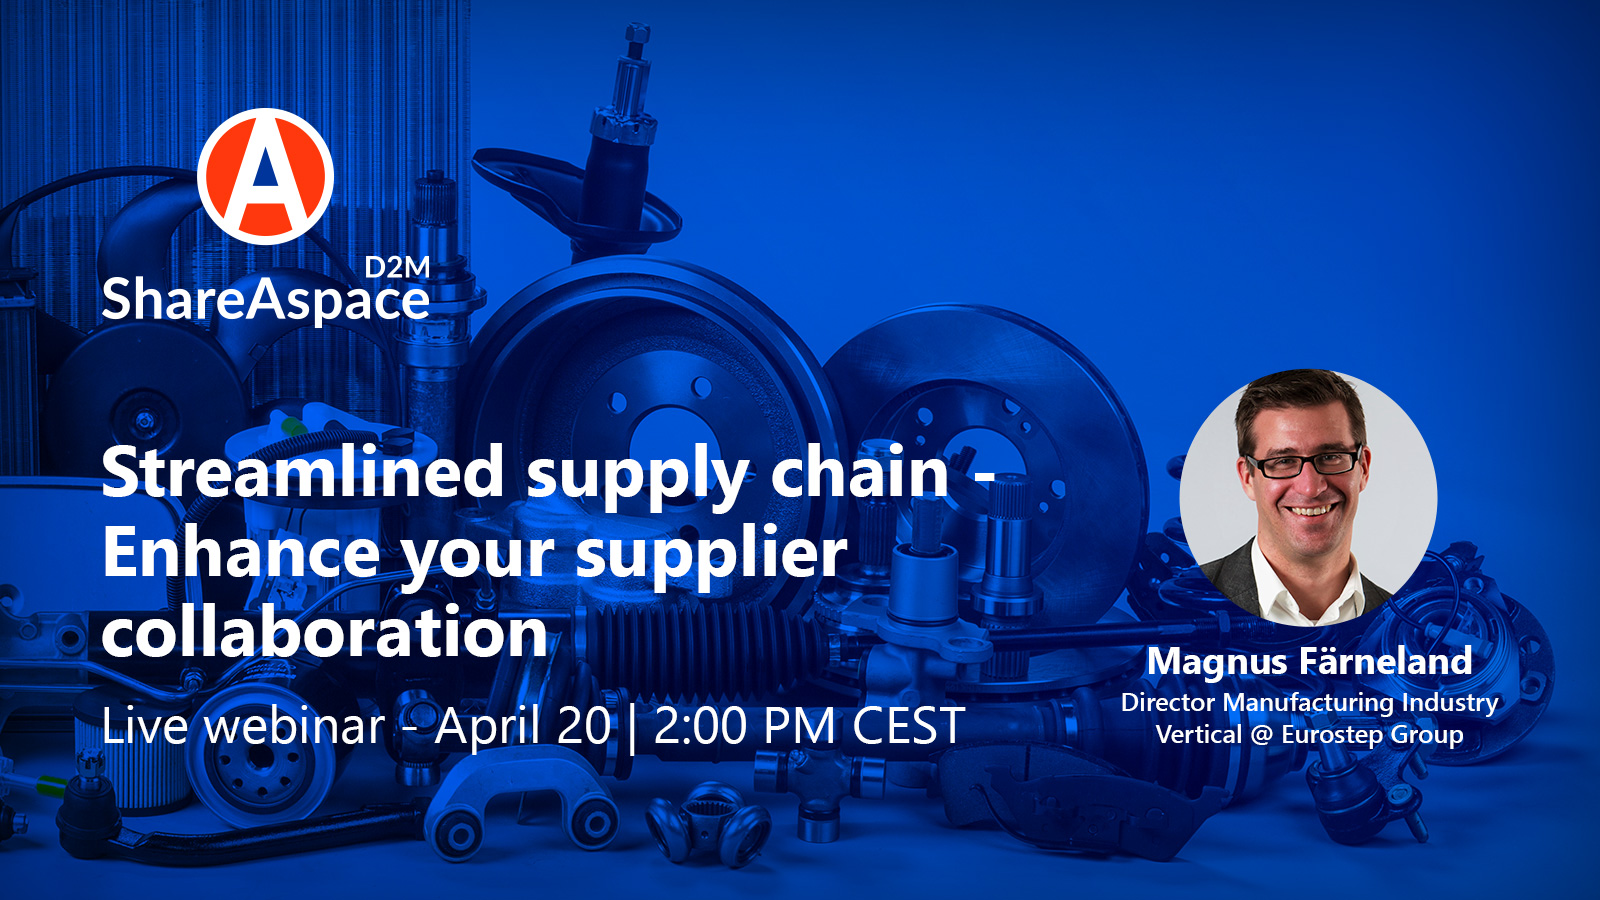 Webinar: Digital transformation in the shipbuilding industry – Improve your supplier collaboration using ShareAspace